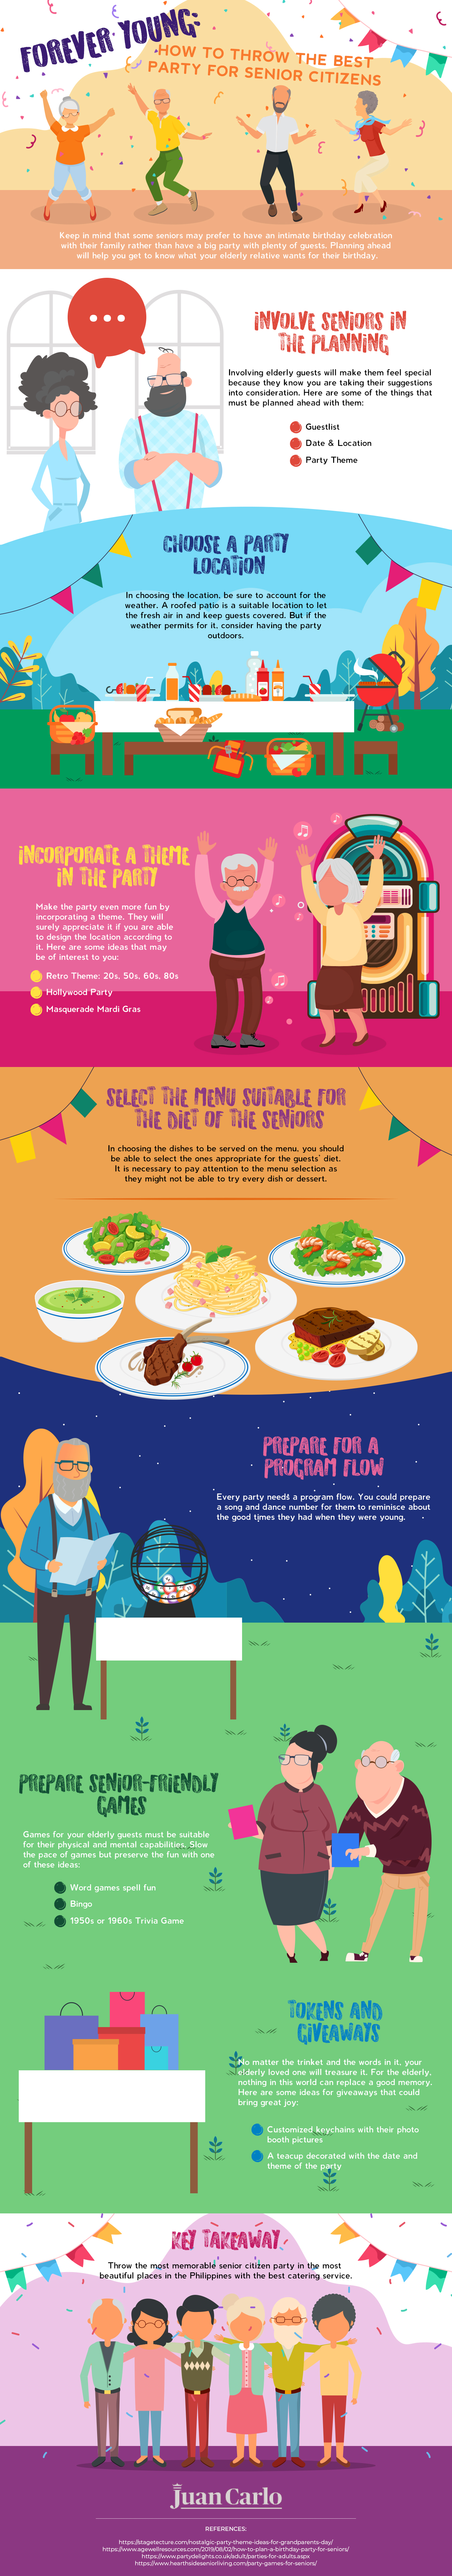 Infog - Forever Young- How to Throw the Best Party for Senior Citizens